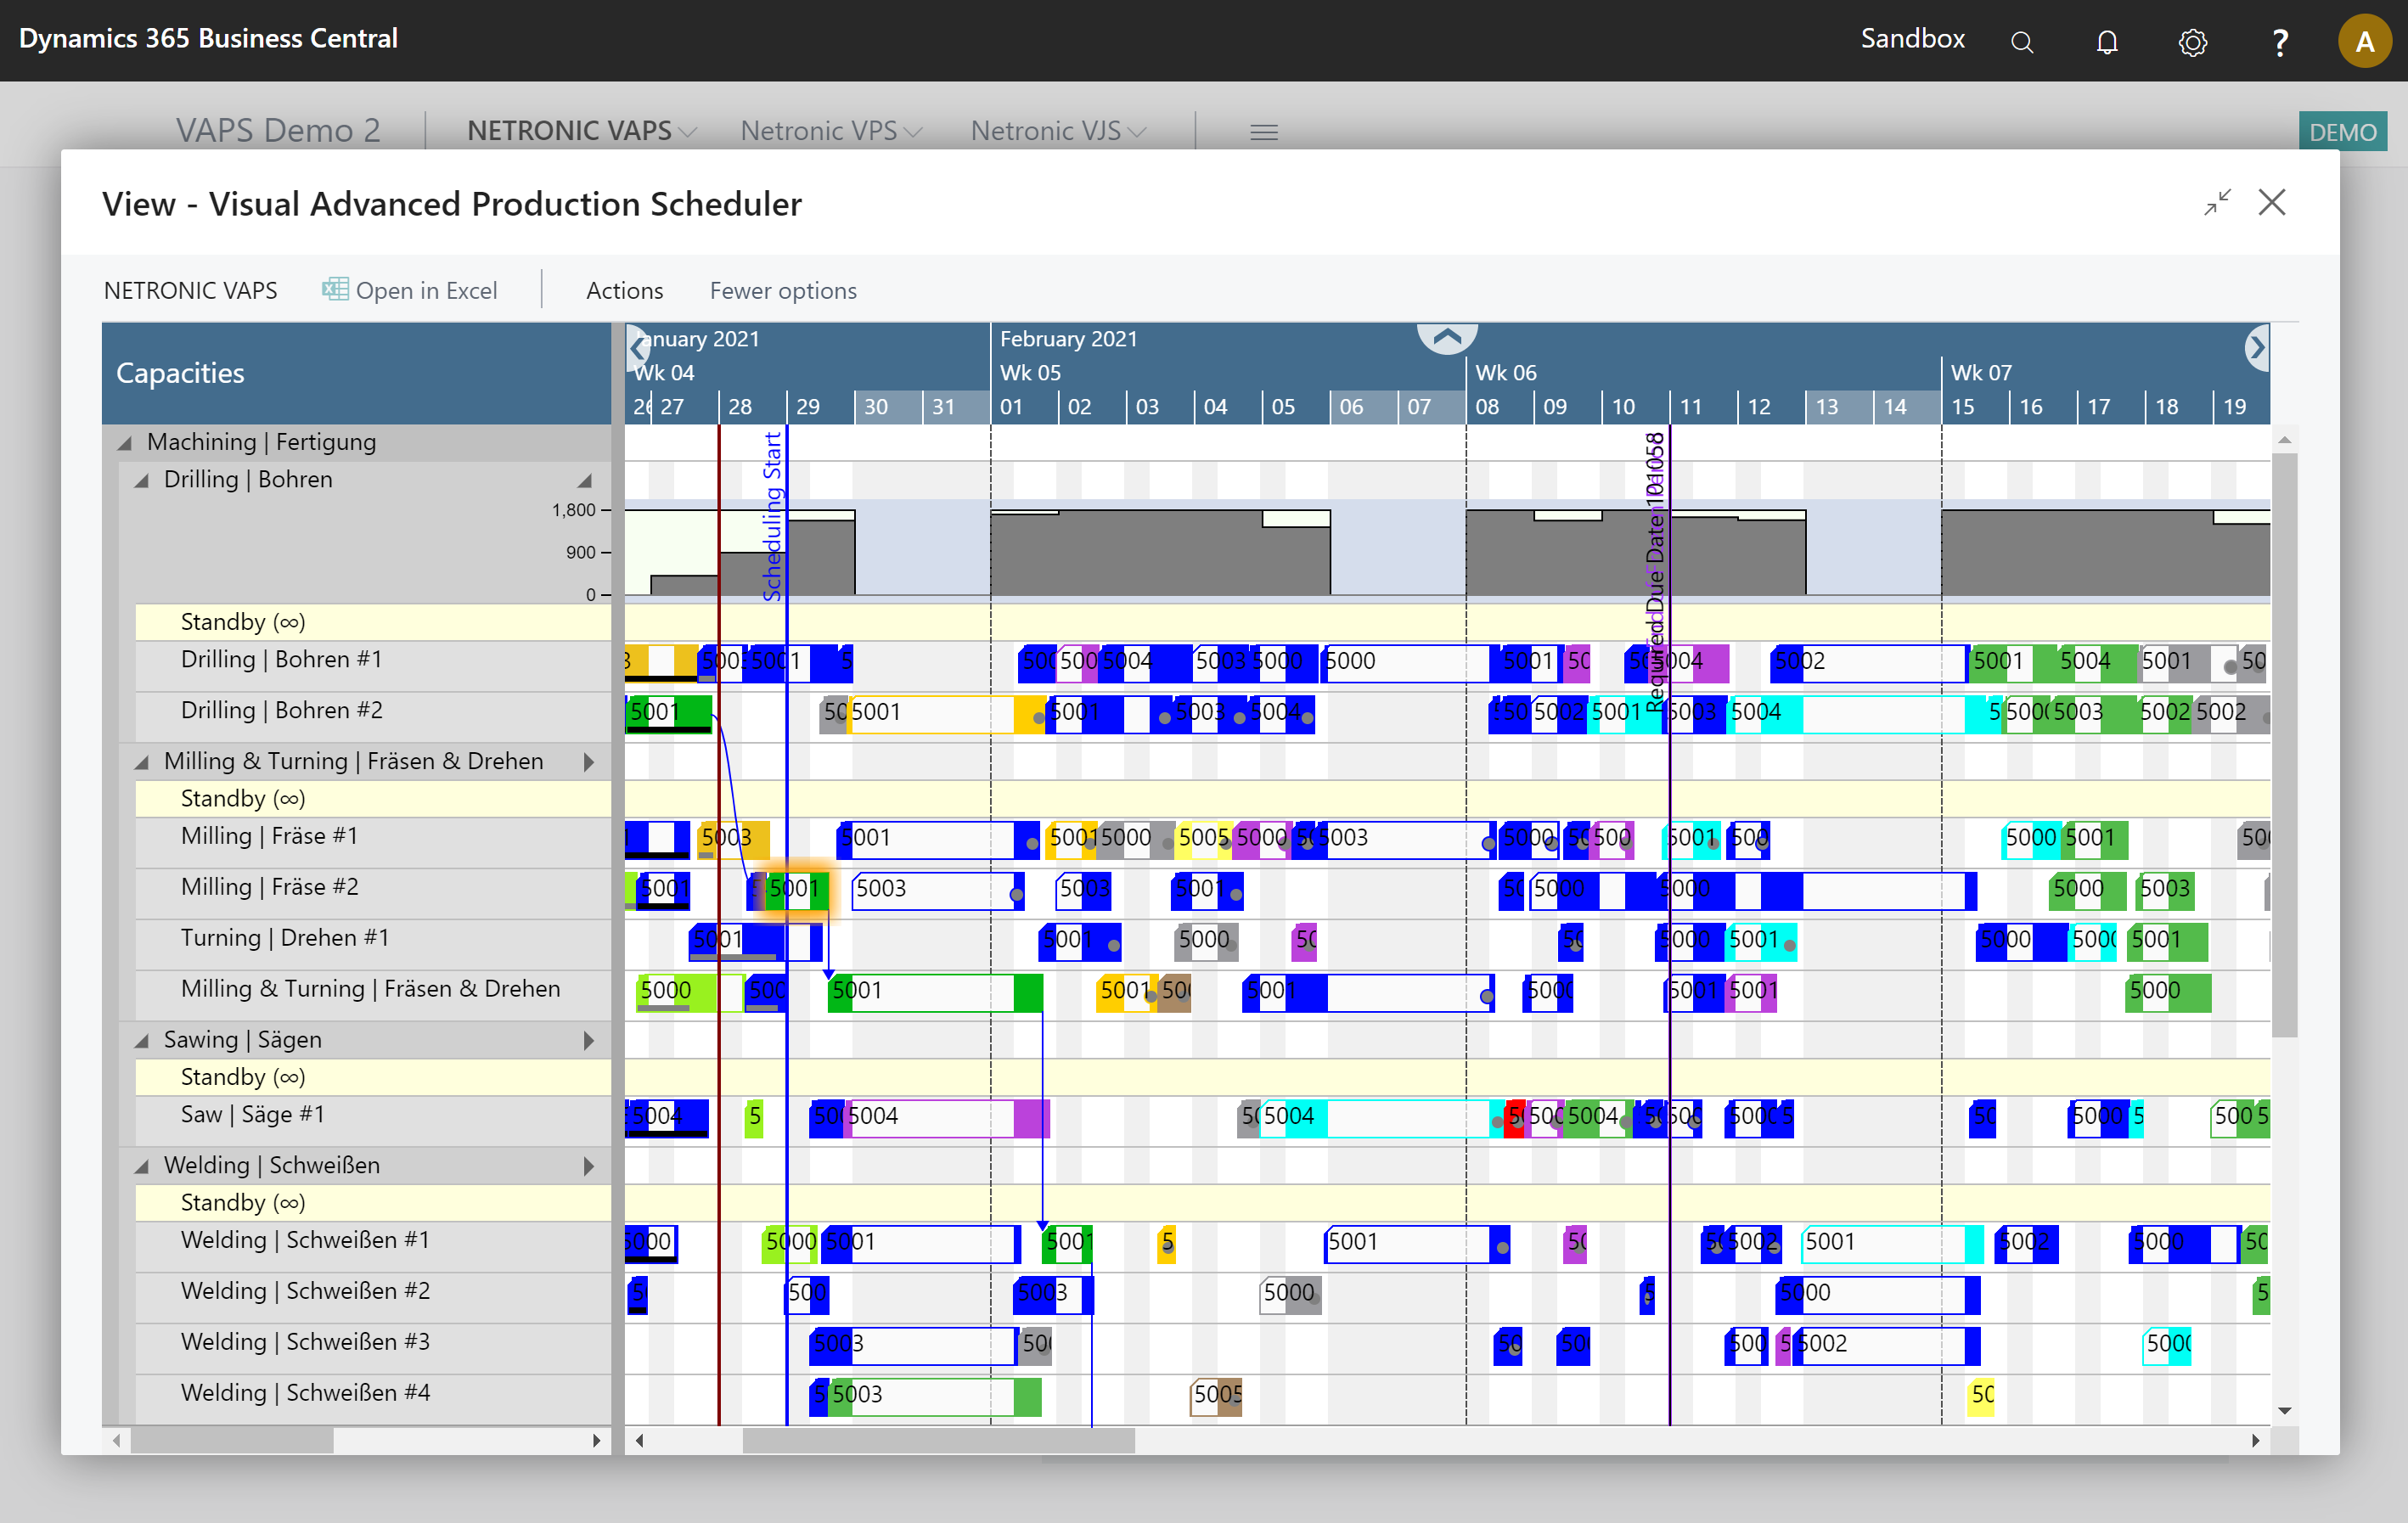 Visual Advanced Production Scheduler for Microsoft Dynamics 365 Business Central - Capacity View